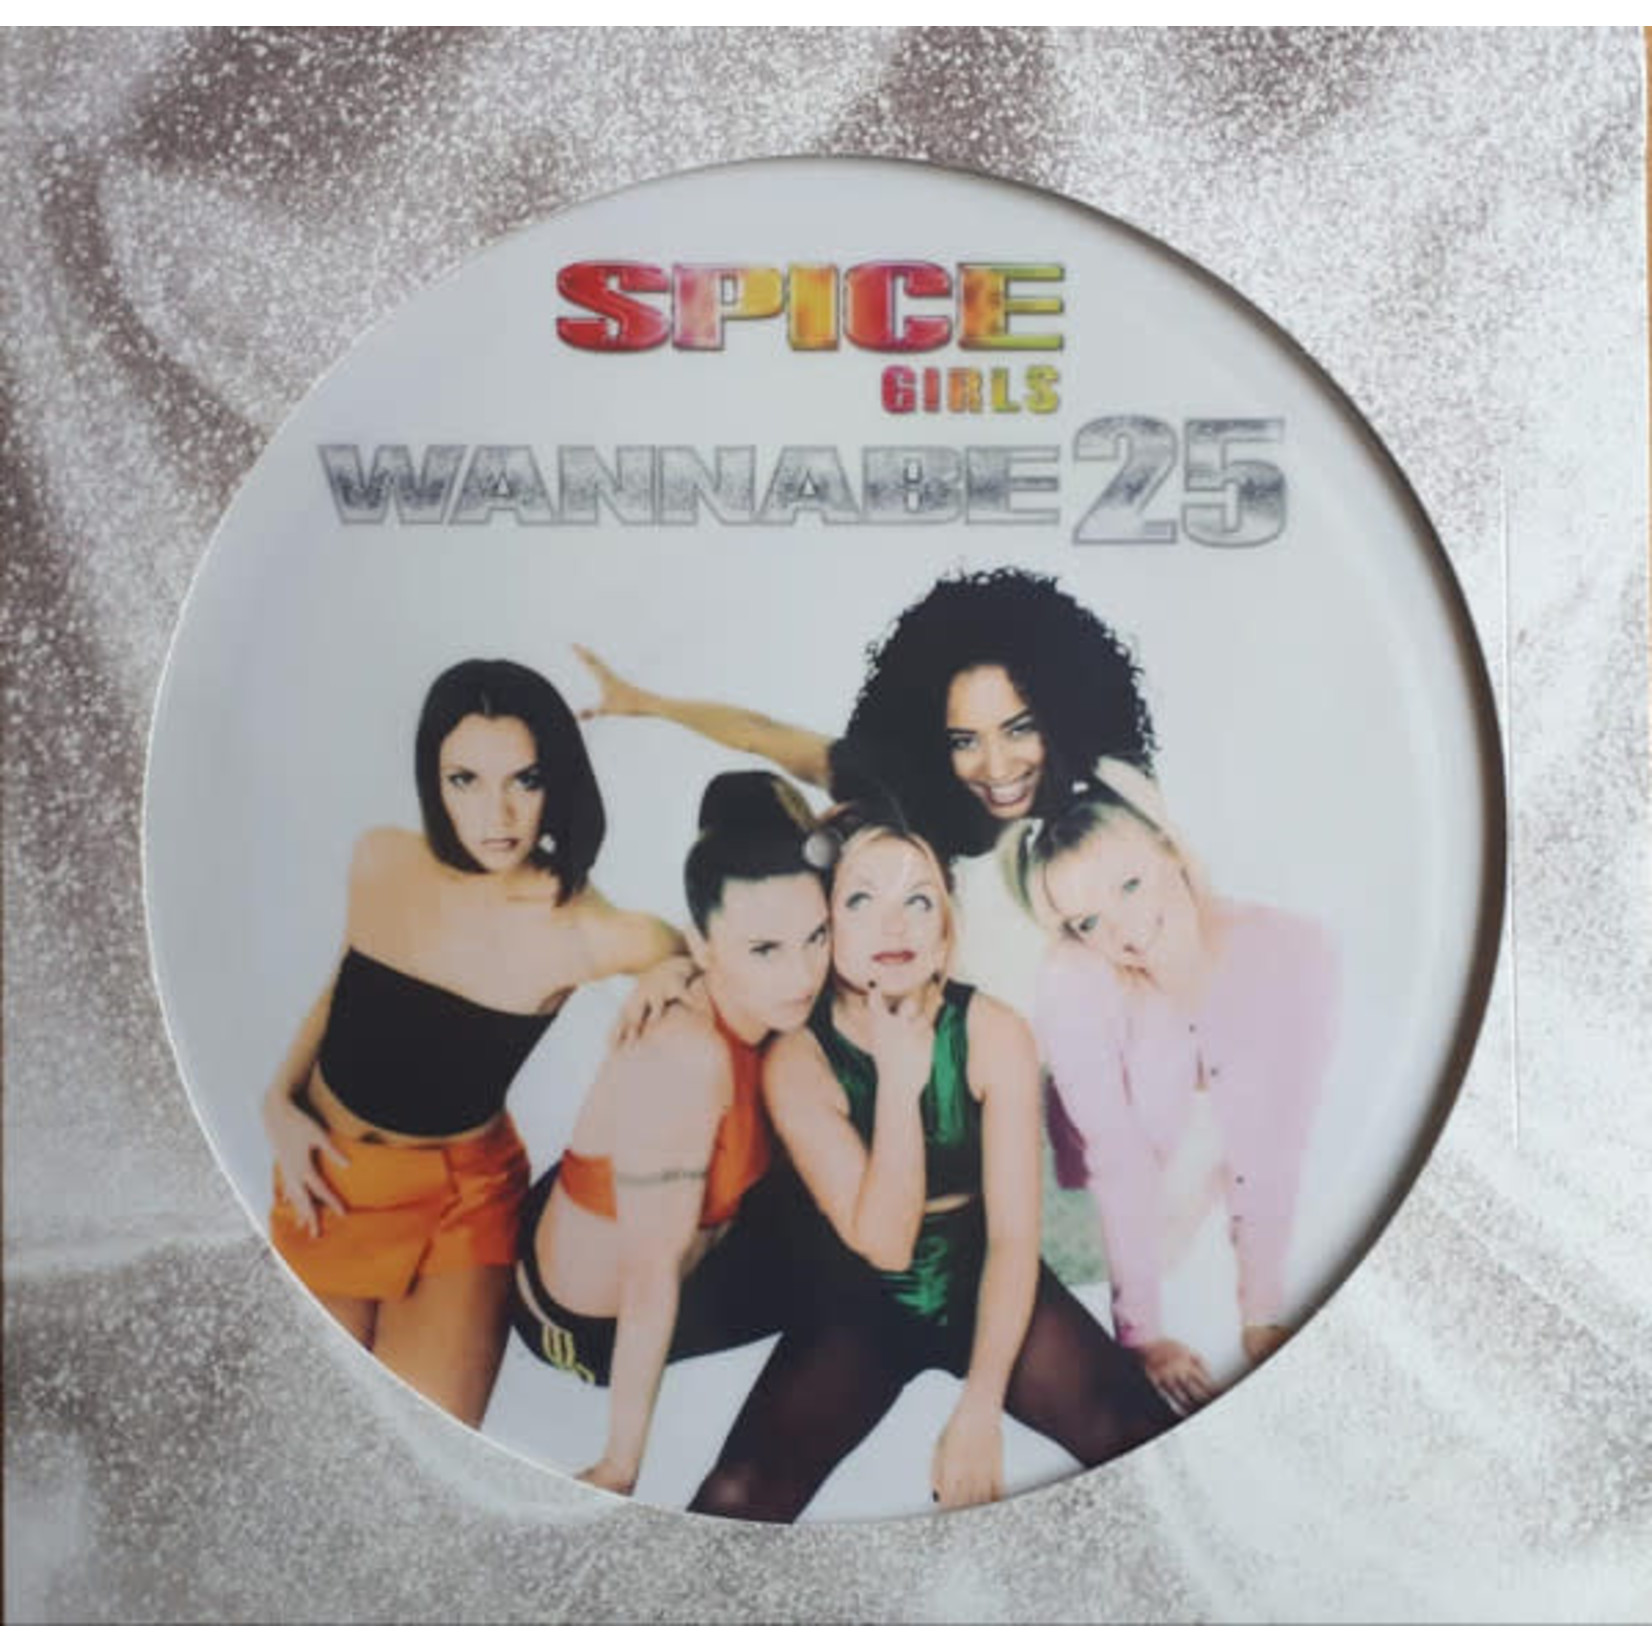 [New] Spice Girls - Wannabe (12'', 25th anniversary picture disc)